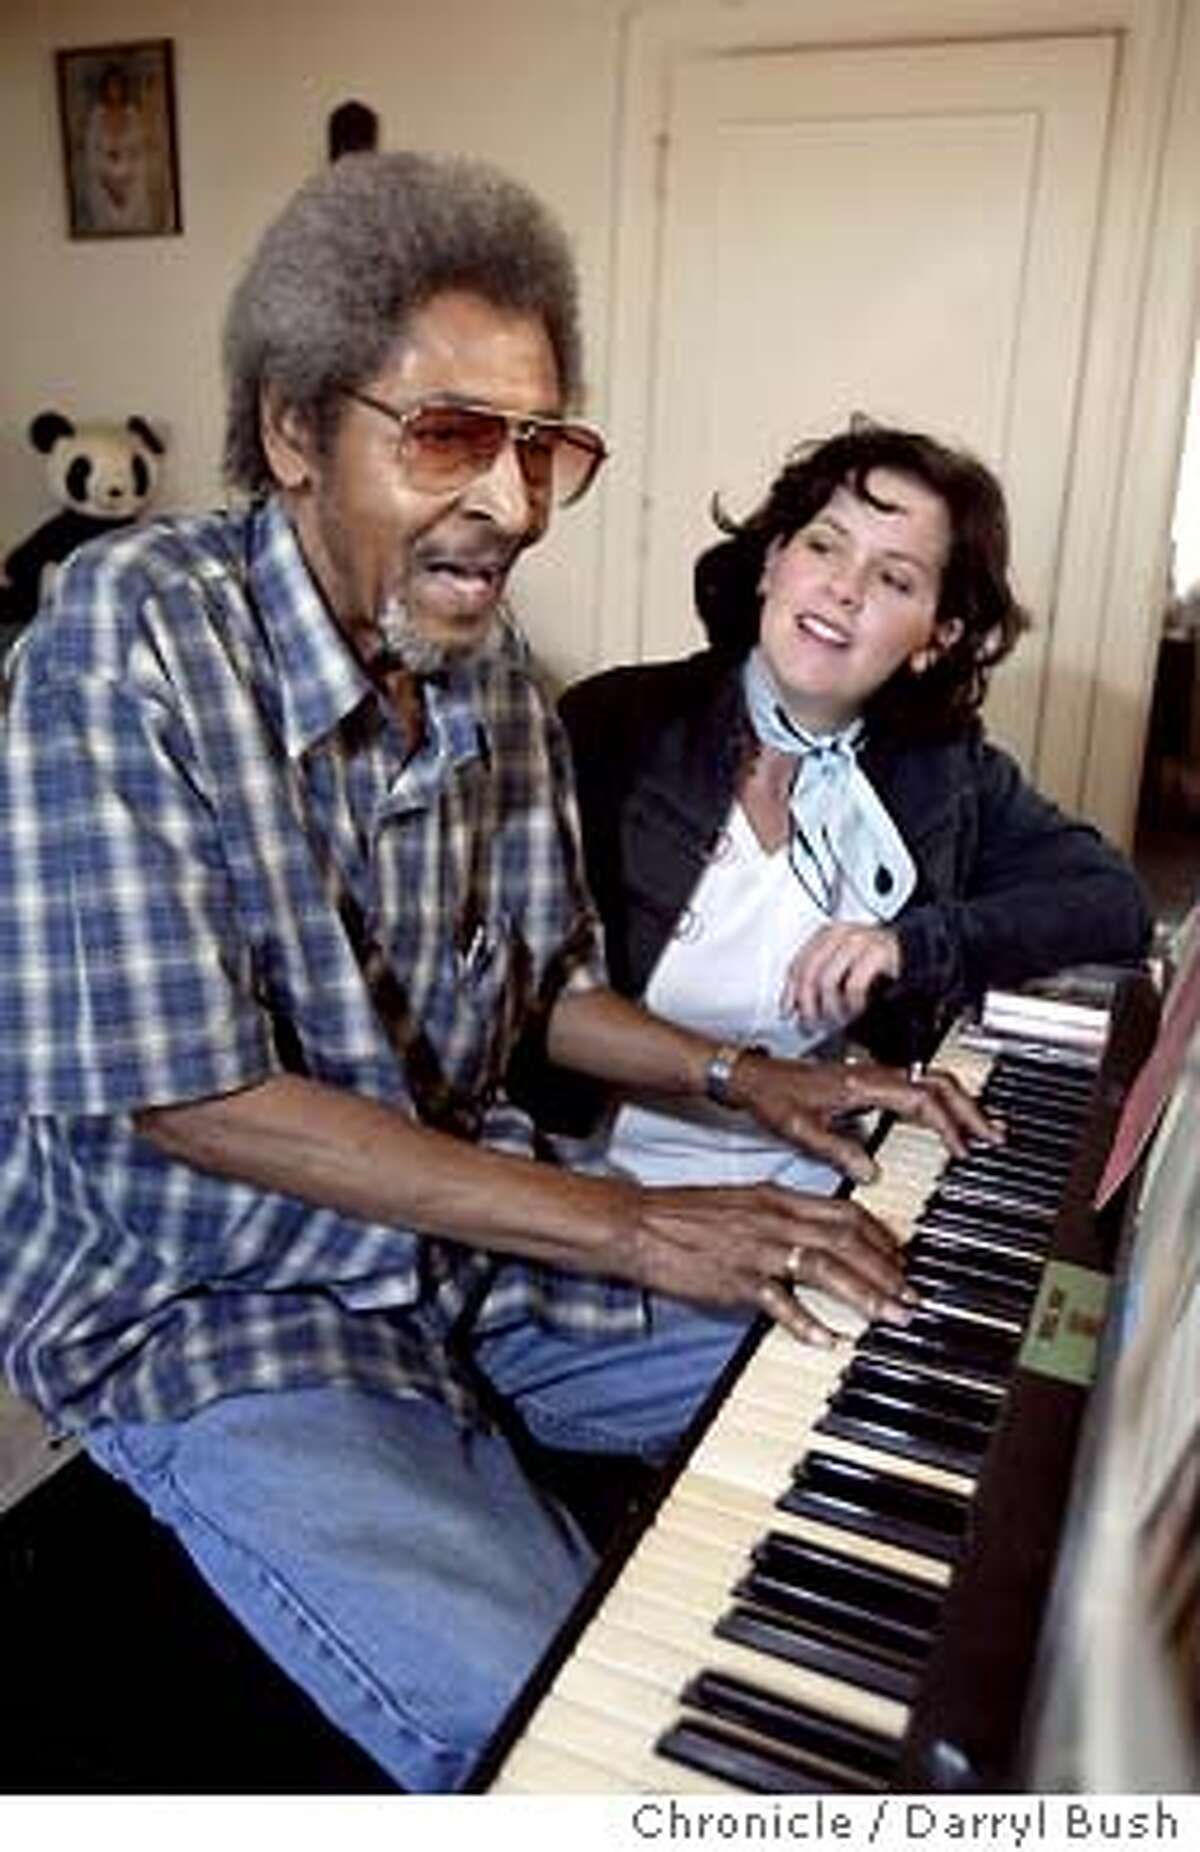 Bobby Sharp songwriter who wrote "Unchain My Heart" for Ray Charles and jazz/pop singer Natasha Miller in Sharp's home. Event on 4/14/04 in Alameda. Darryl Bush / The Chronicle